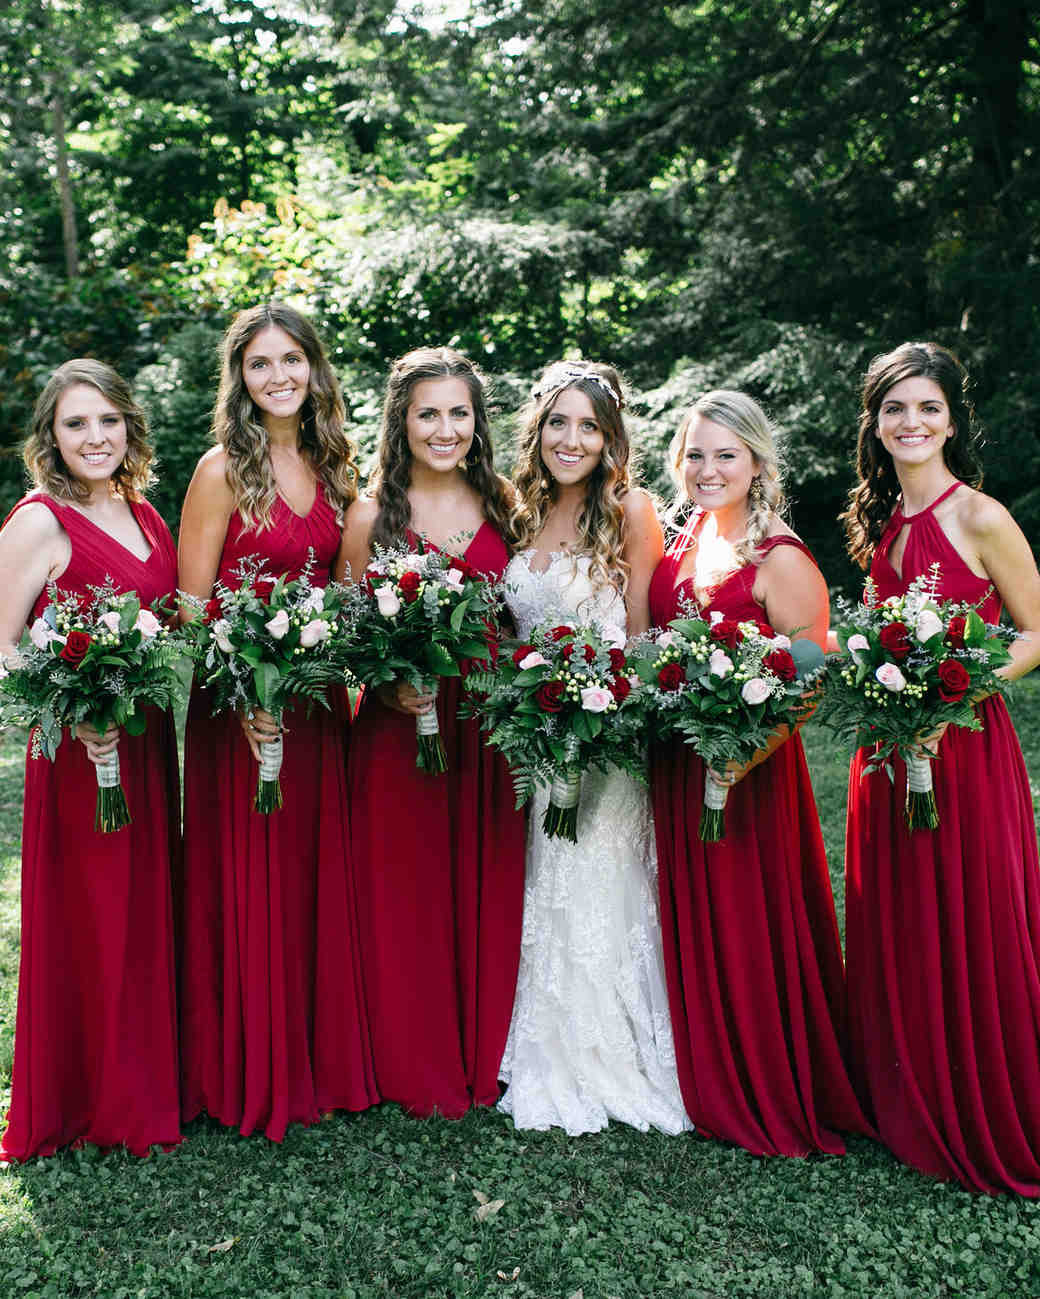 Fall Wedding Bridesmaid Dresses
 Advice All Newly Engaged Couples Need to Hear According